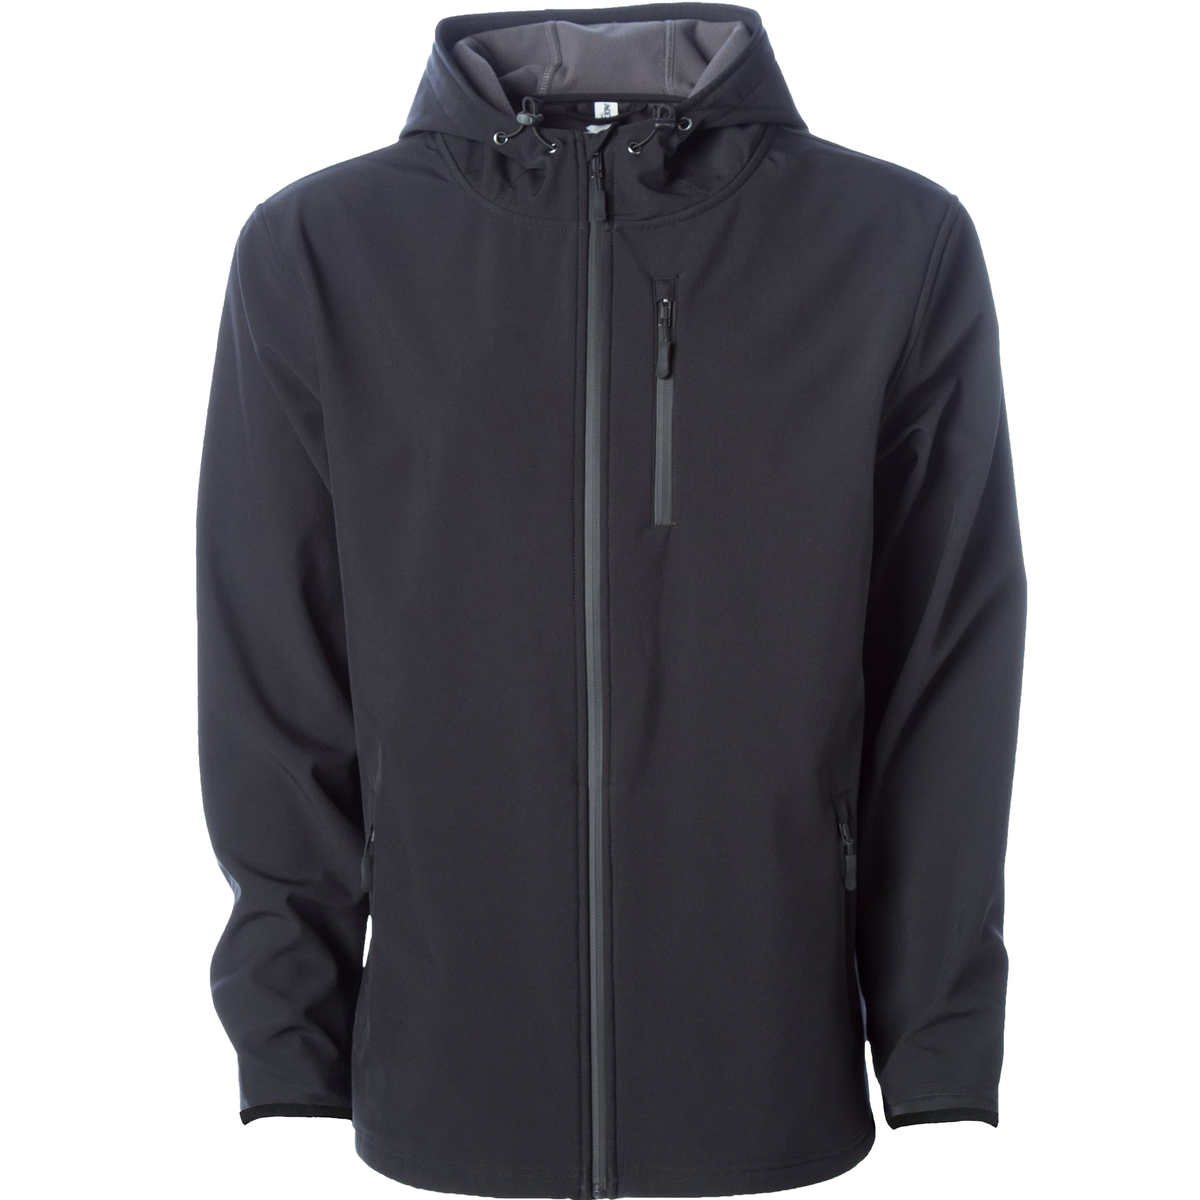 EXP35SSZ - Poly Tech Water Resistant Soft Shell Jacket